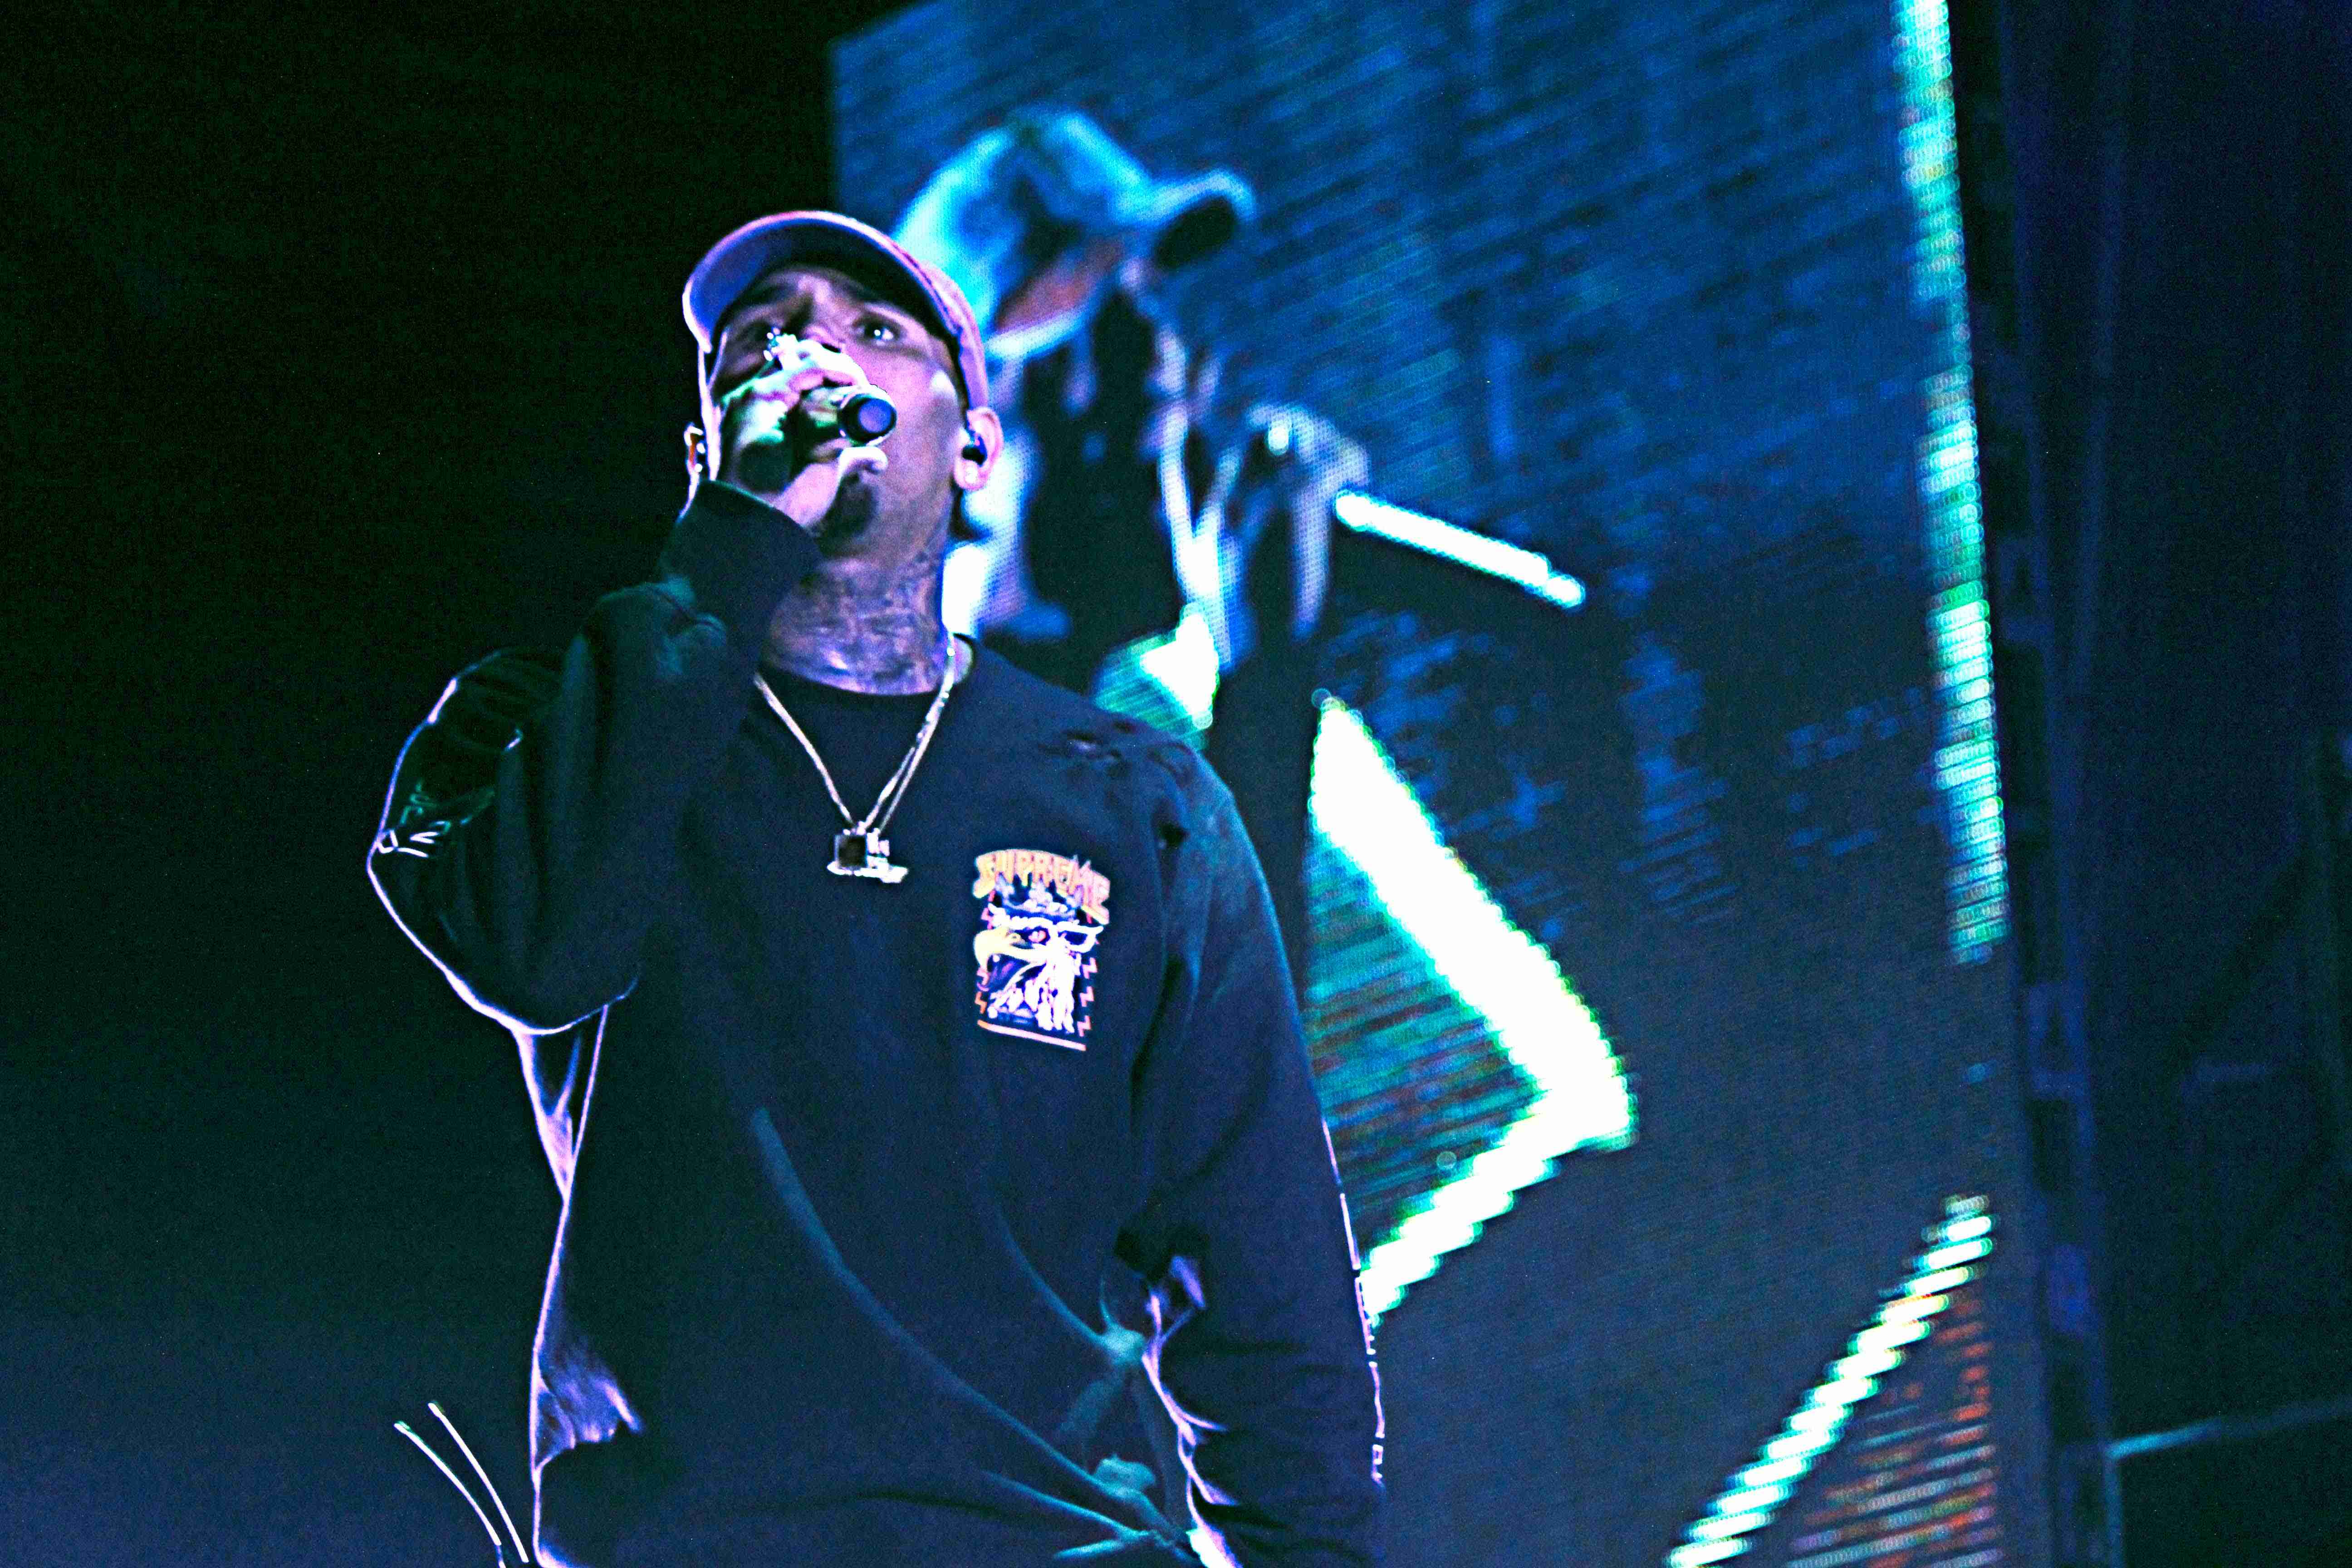 Concert review Chris Brown brings ‘One Hell of a Night’ tour to